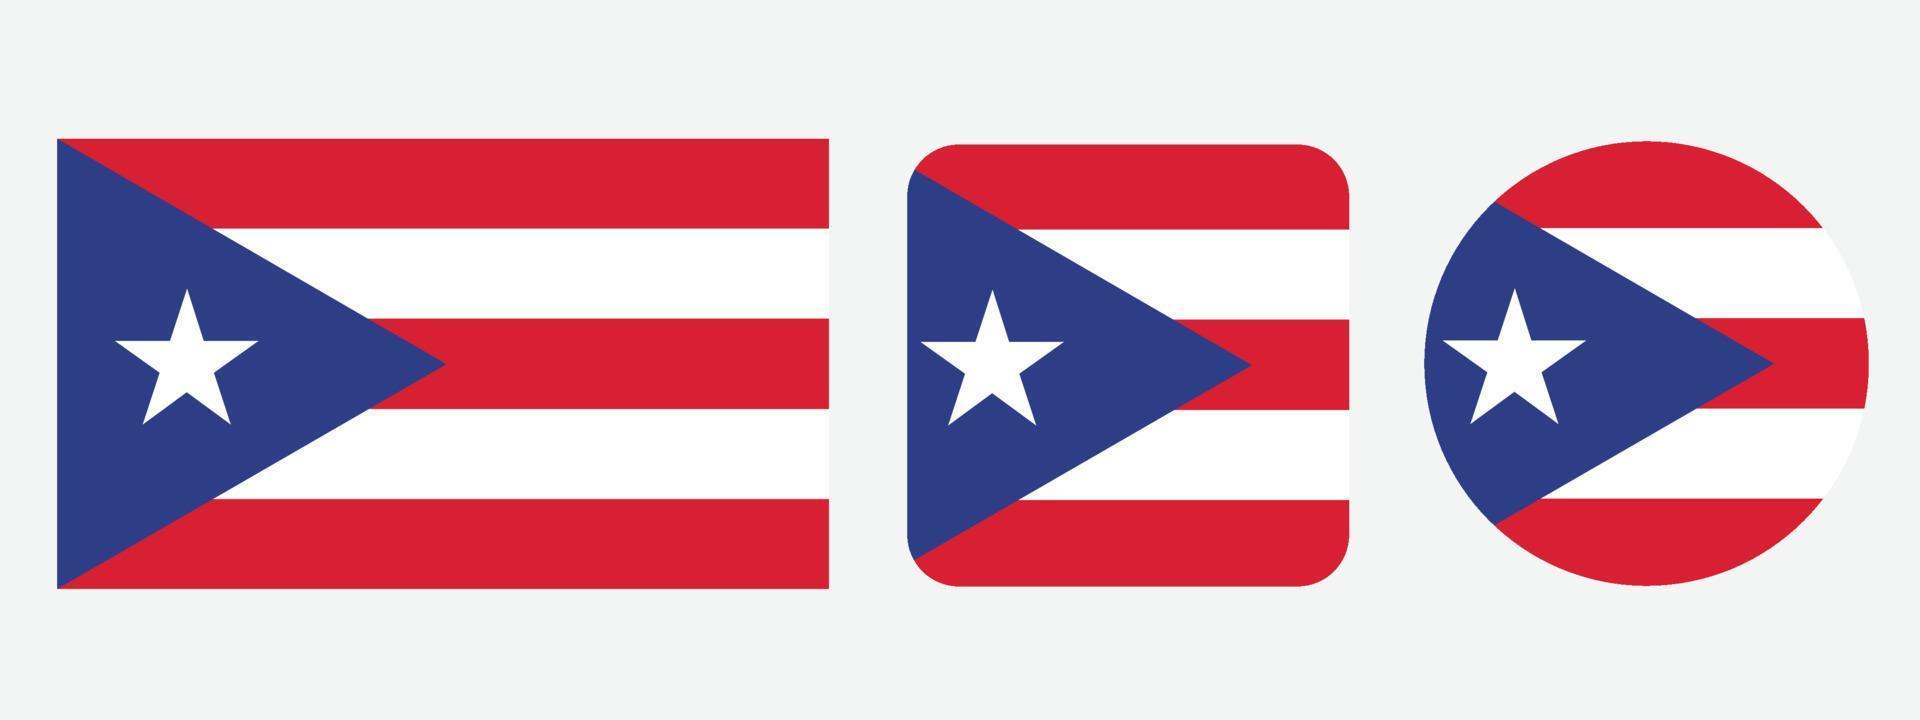 Puerto Rico flag icon . web icon set . icons collection flat. Simple vector illustration.